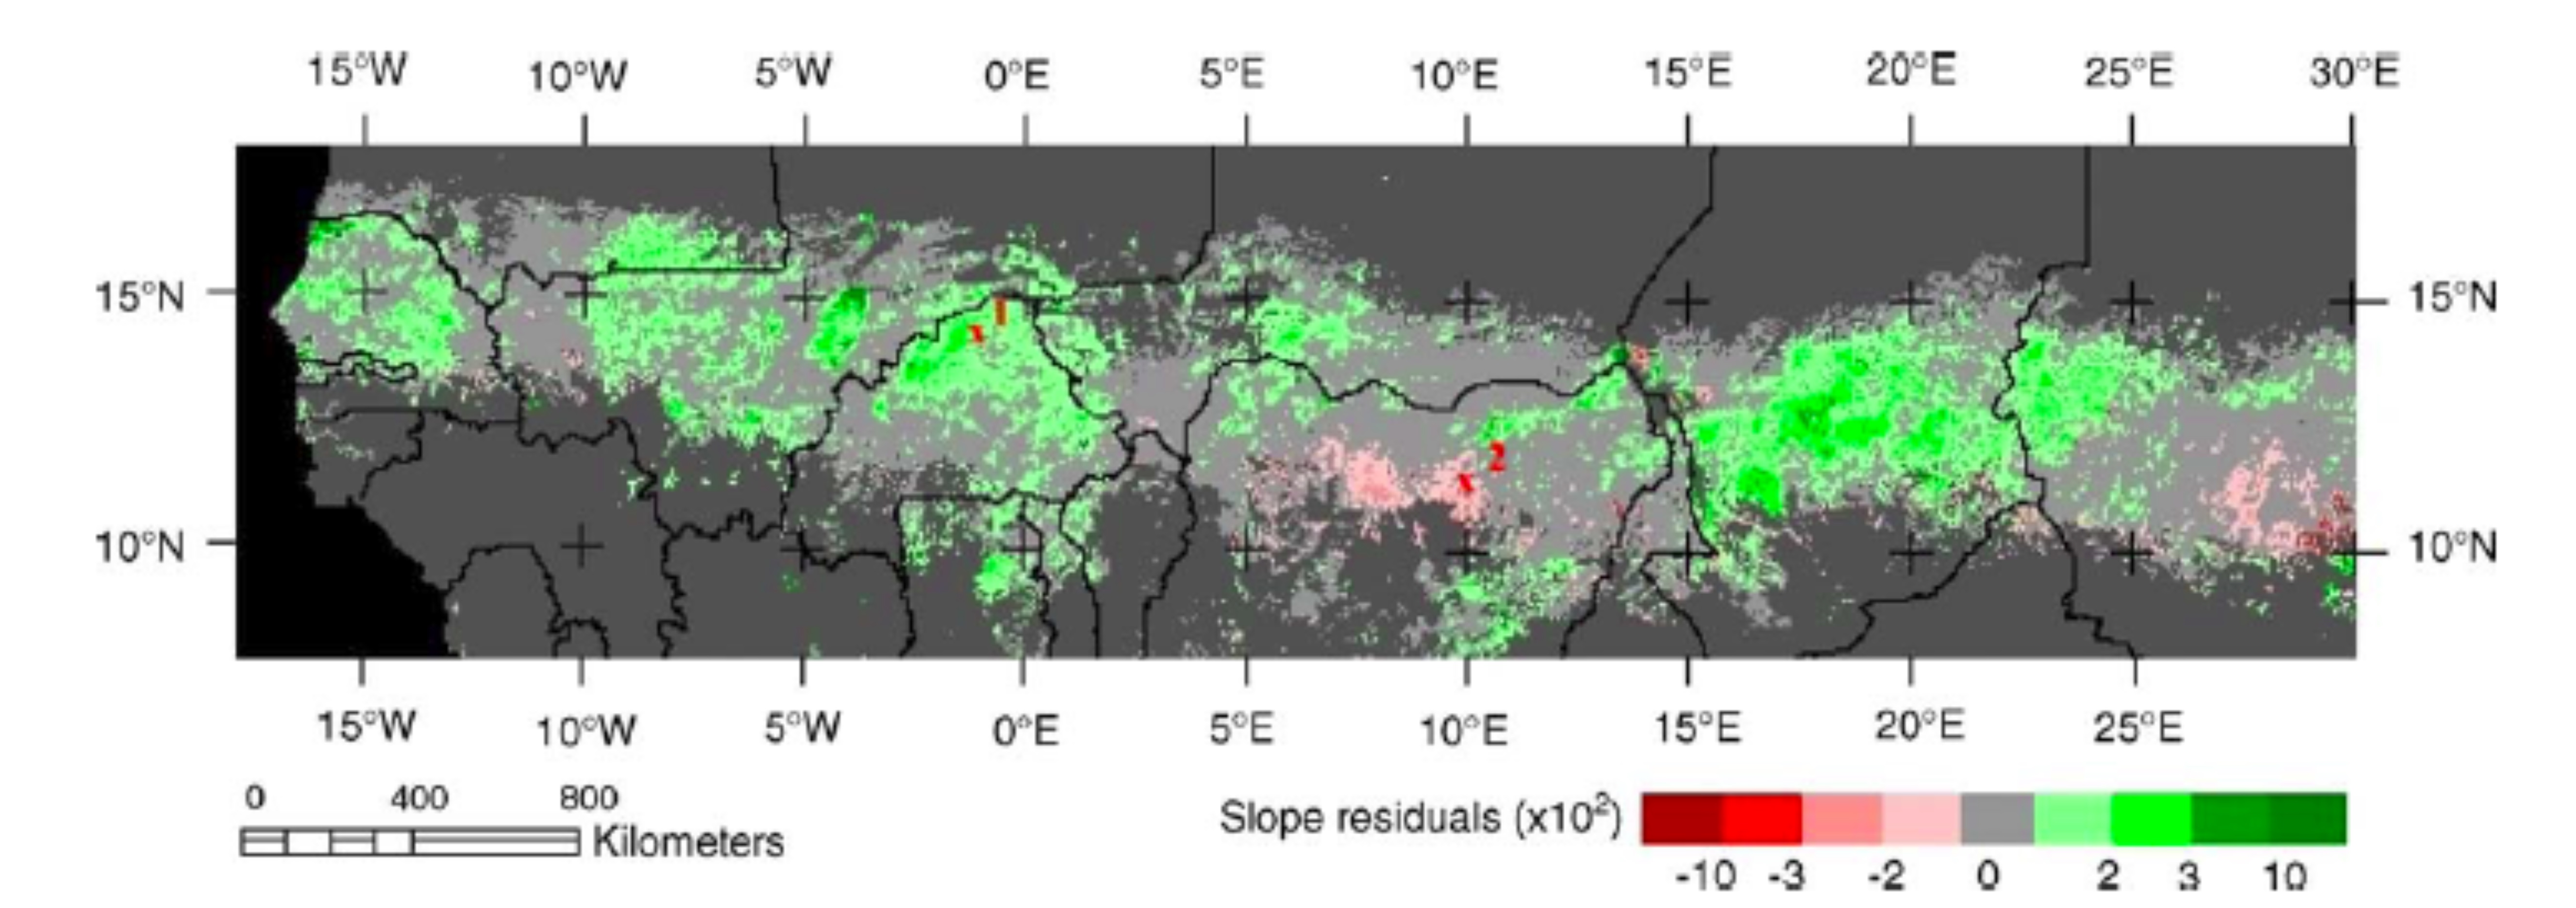 Greening (green) and browning (red) of the West African Sahel - Source: Herrmann, Anyamba and Tucker, 2005